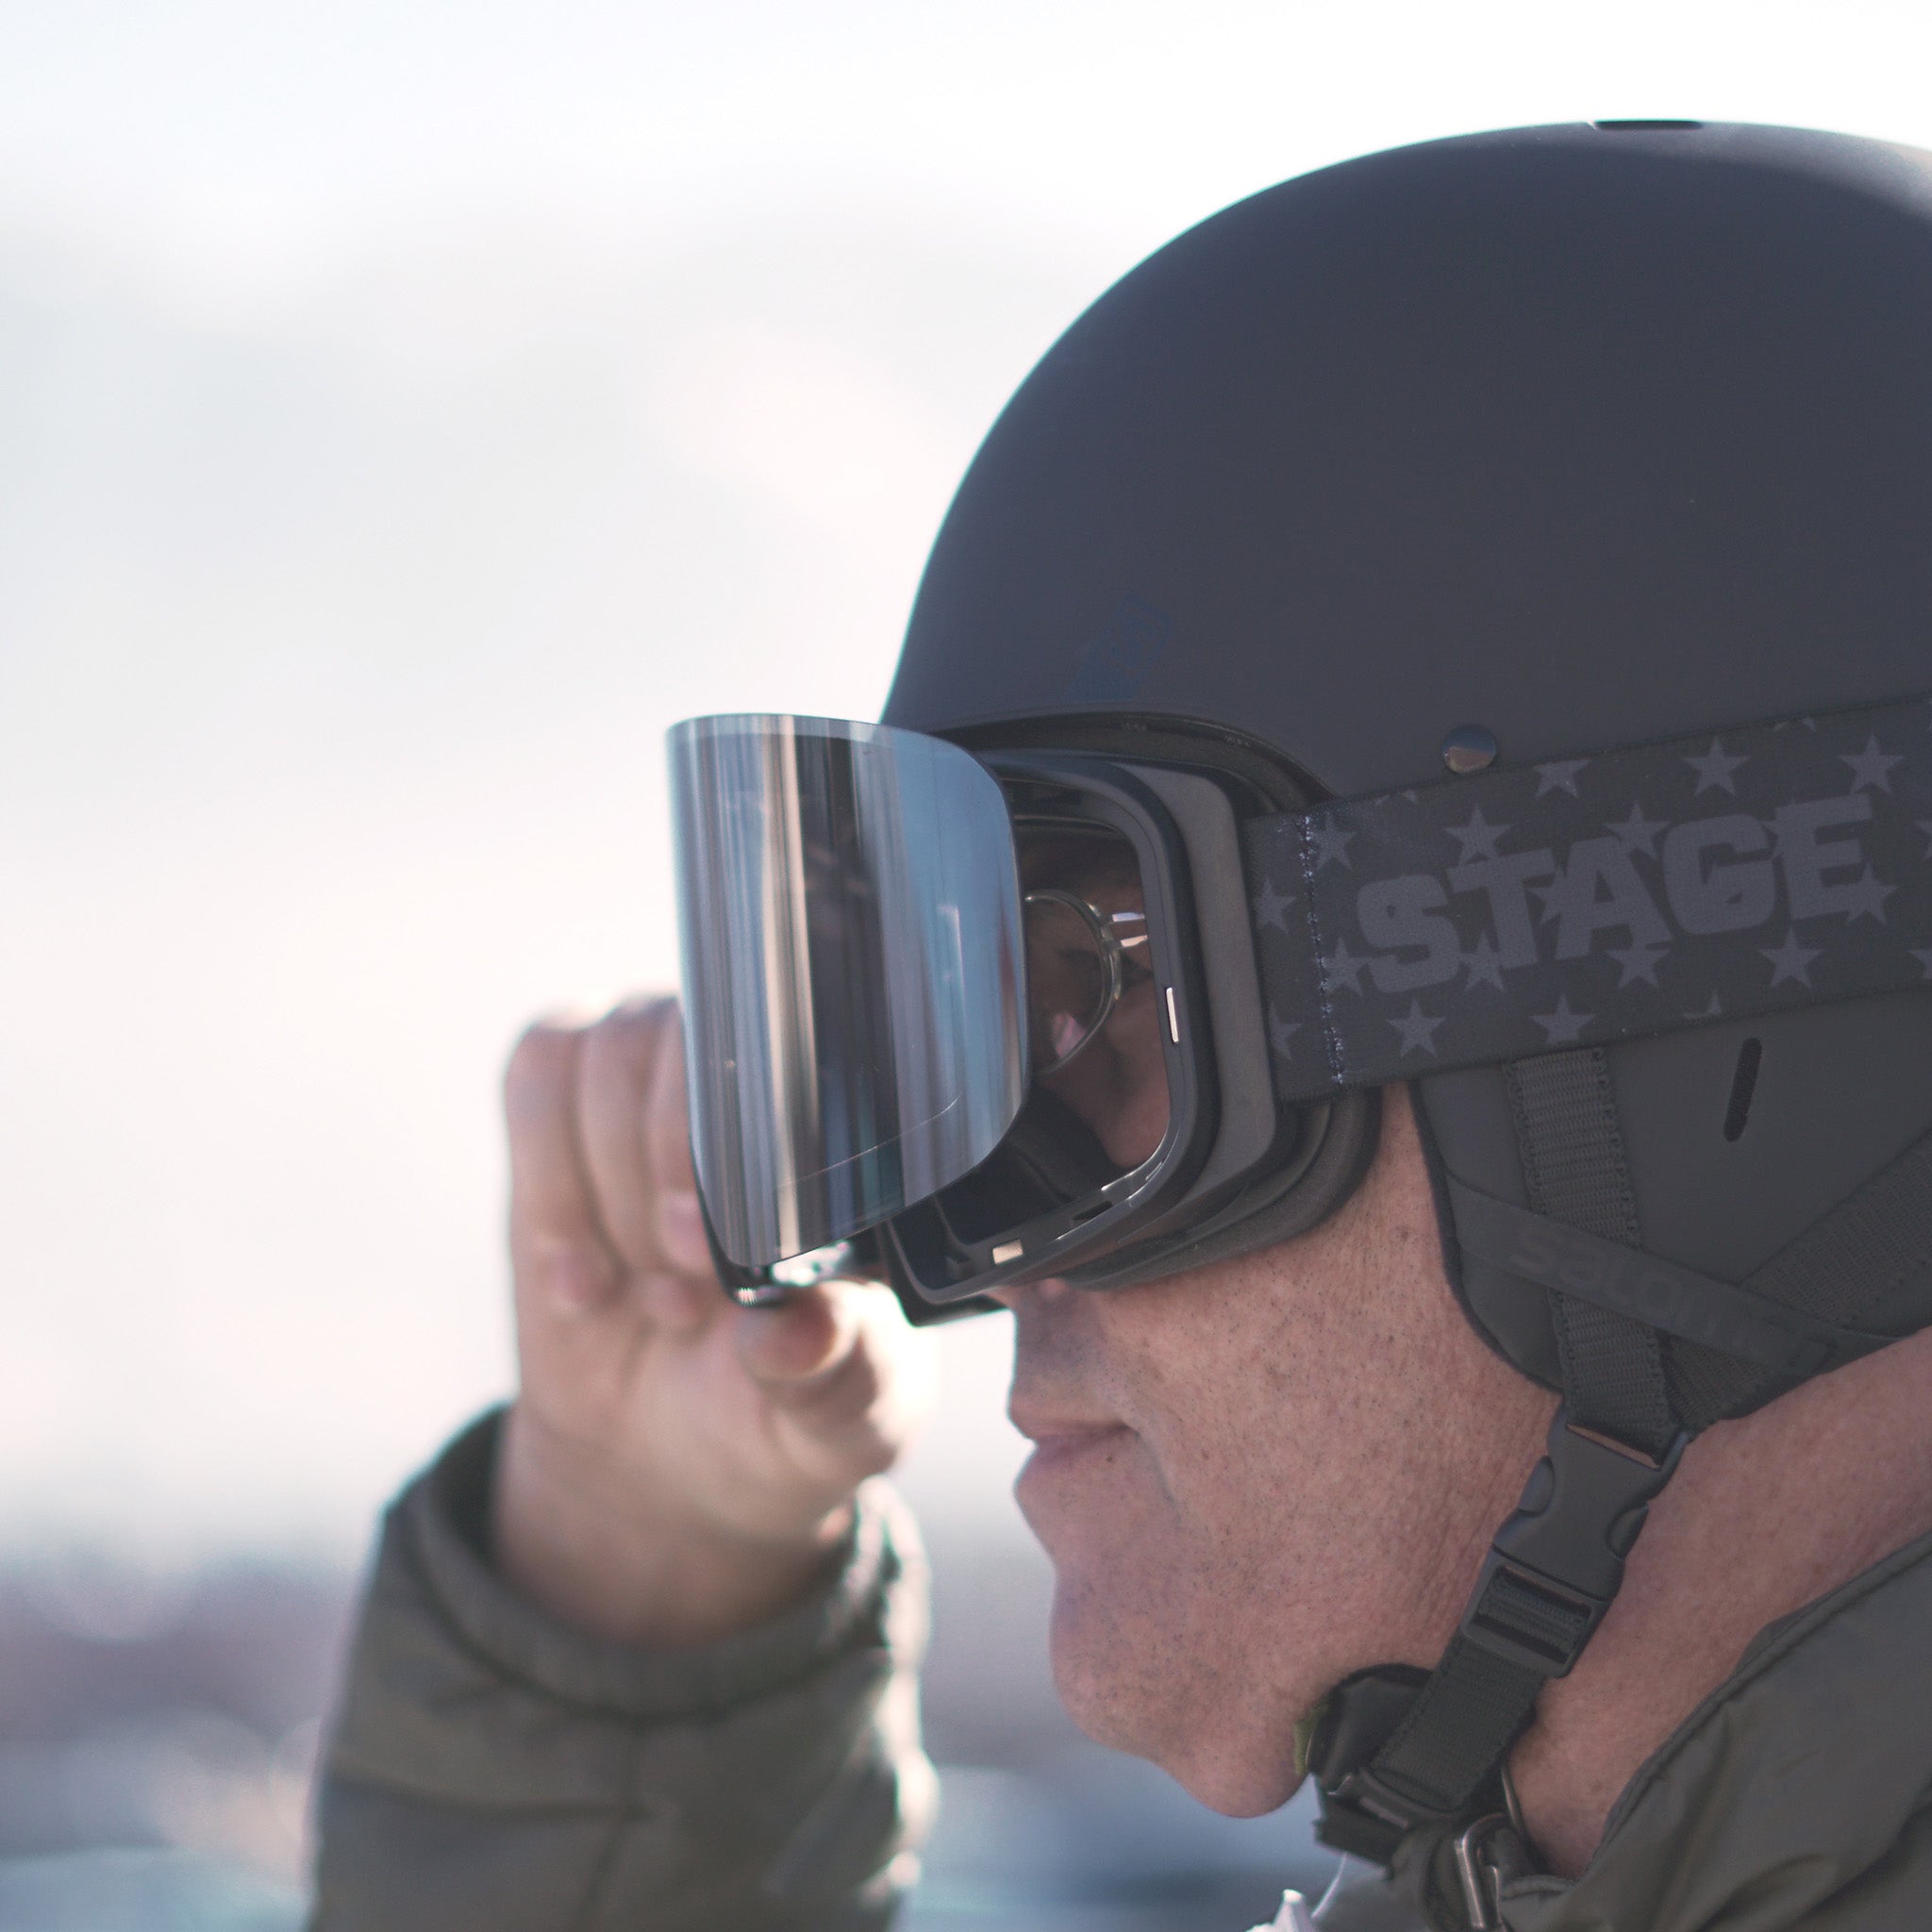 STAGE Propnetic, magnetic ski goggle features lightning fast magnetic lens changes, so that you can change your lens on the slopes. Get the most out of your ski day with the best ski goggle on the market.